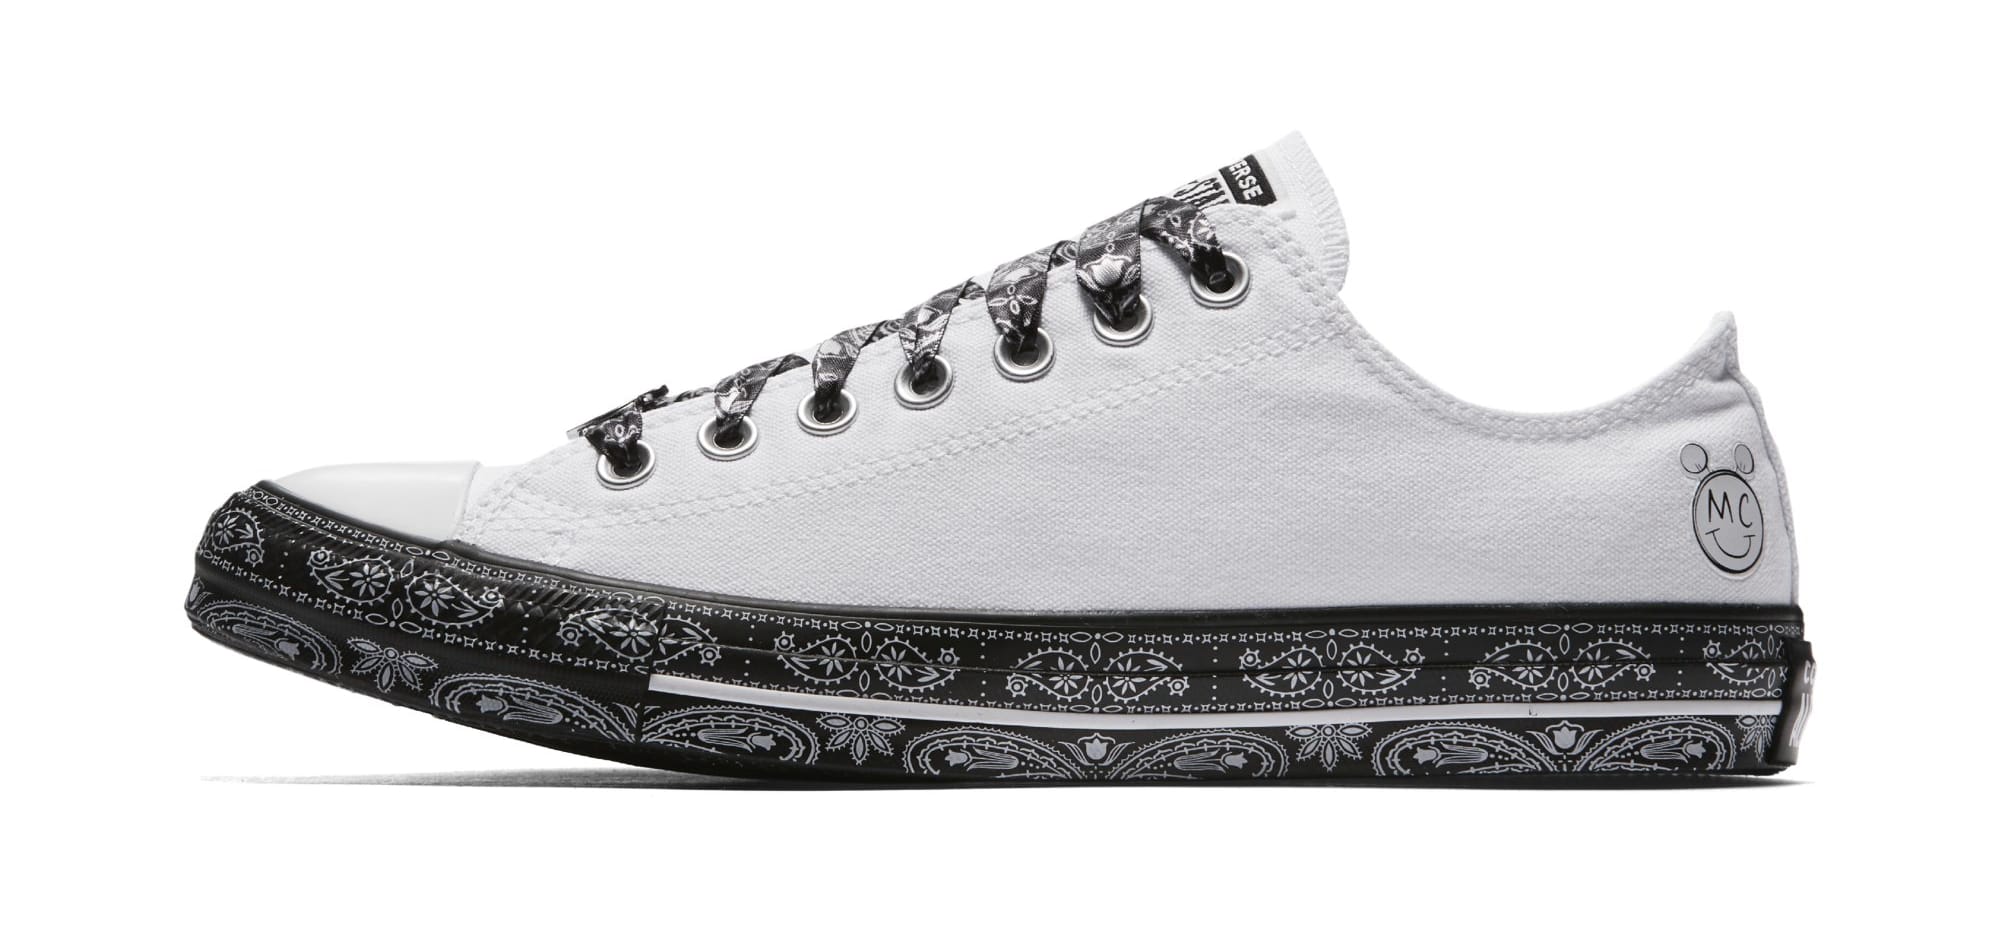 Miley Cyrus x Converse Chuck Taylor All-Star Release Date | Sole Collector